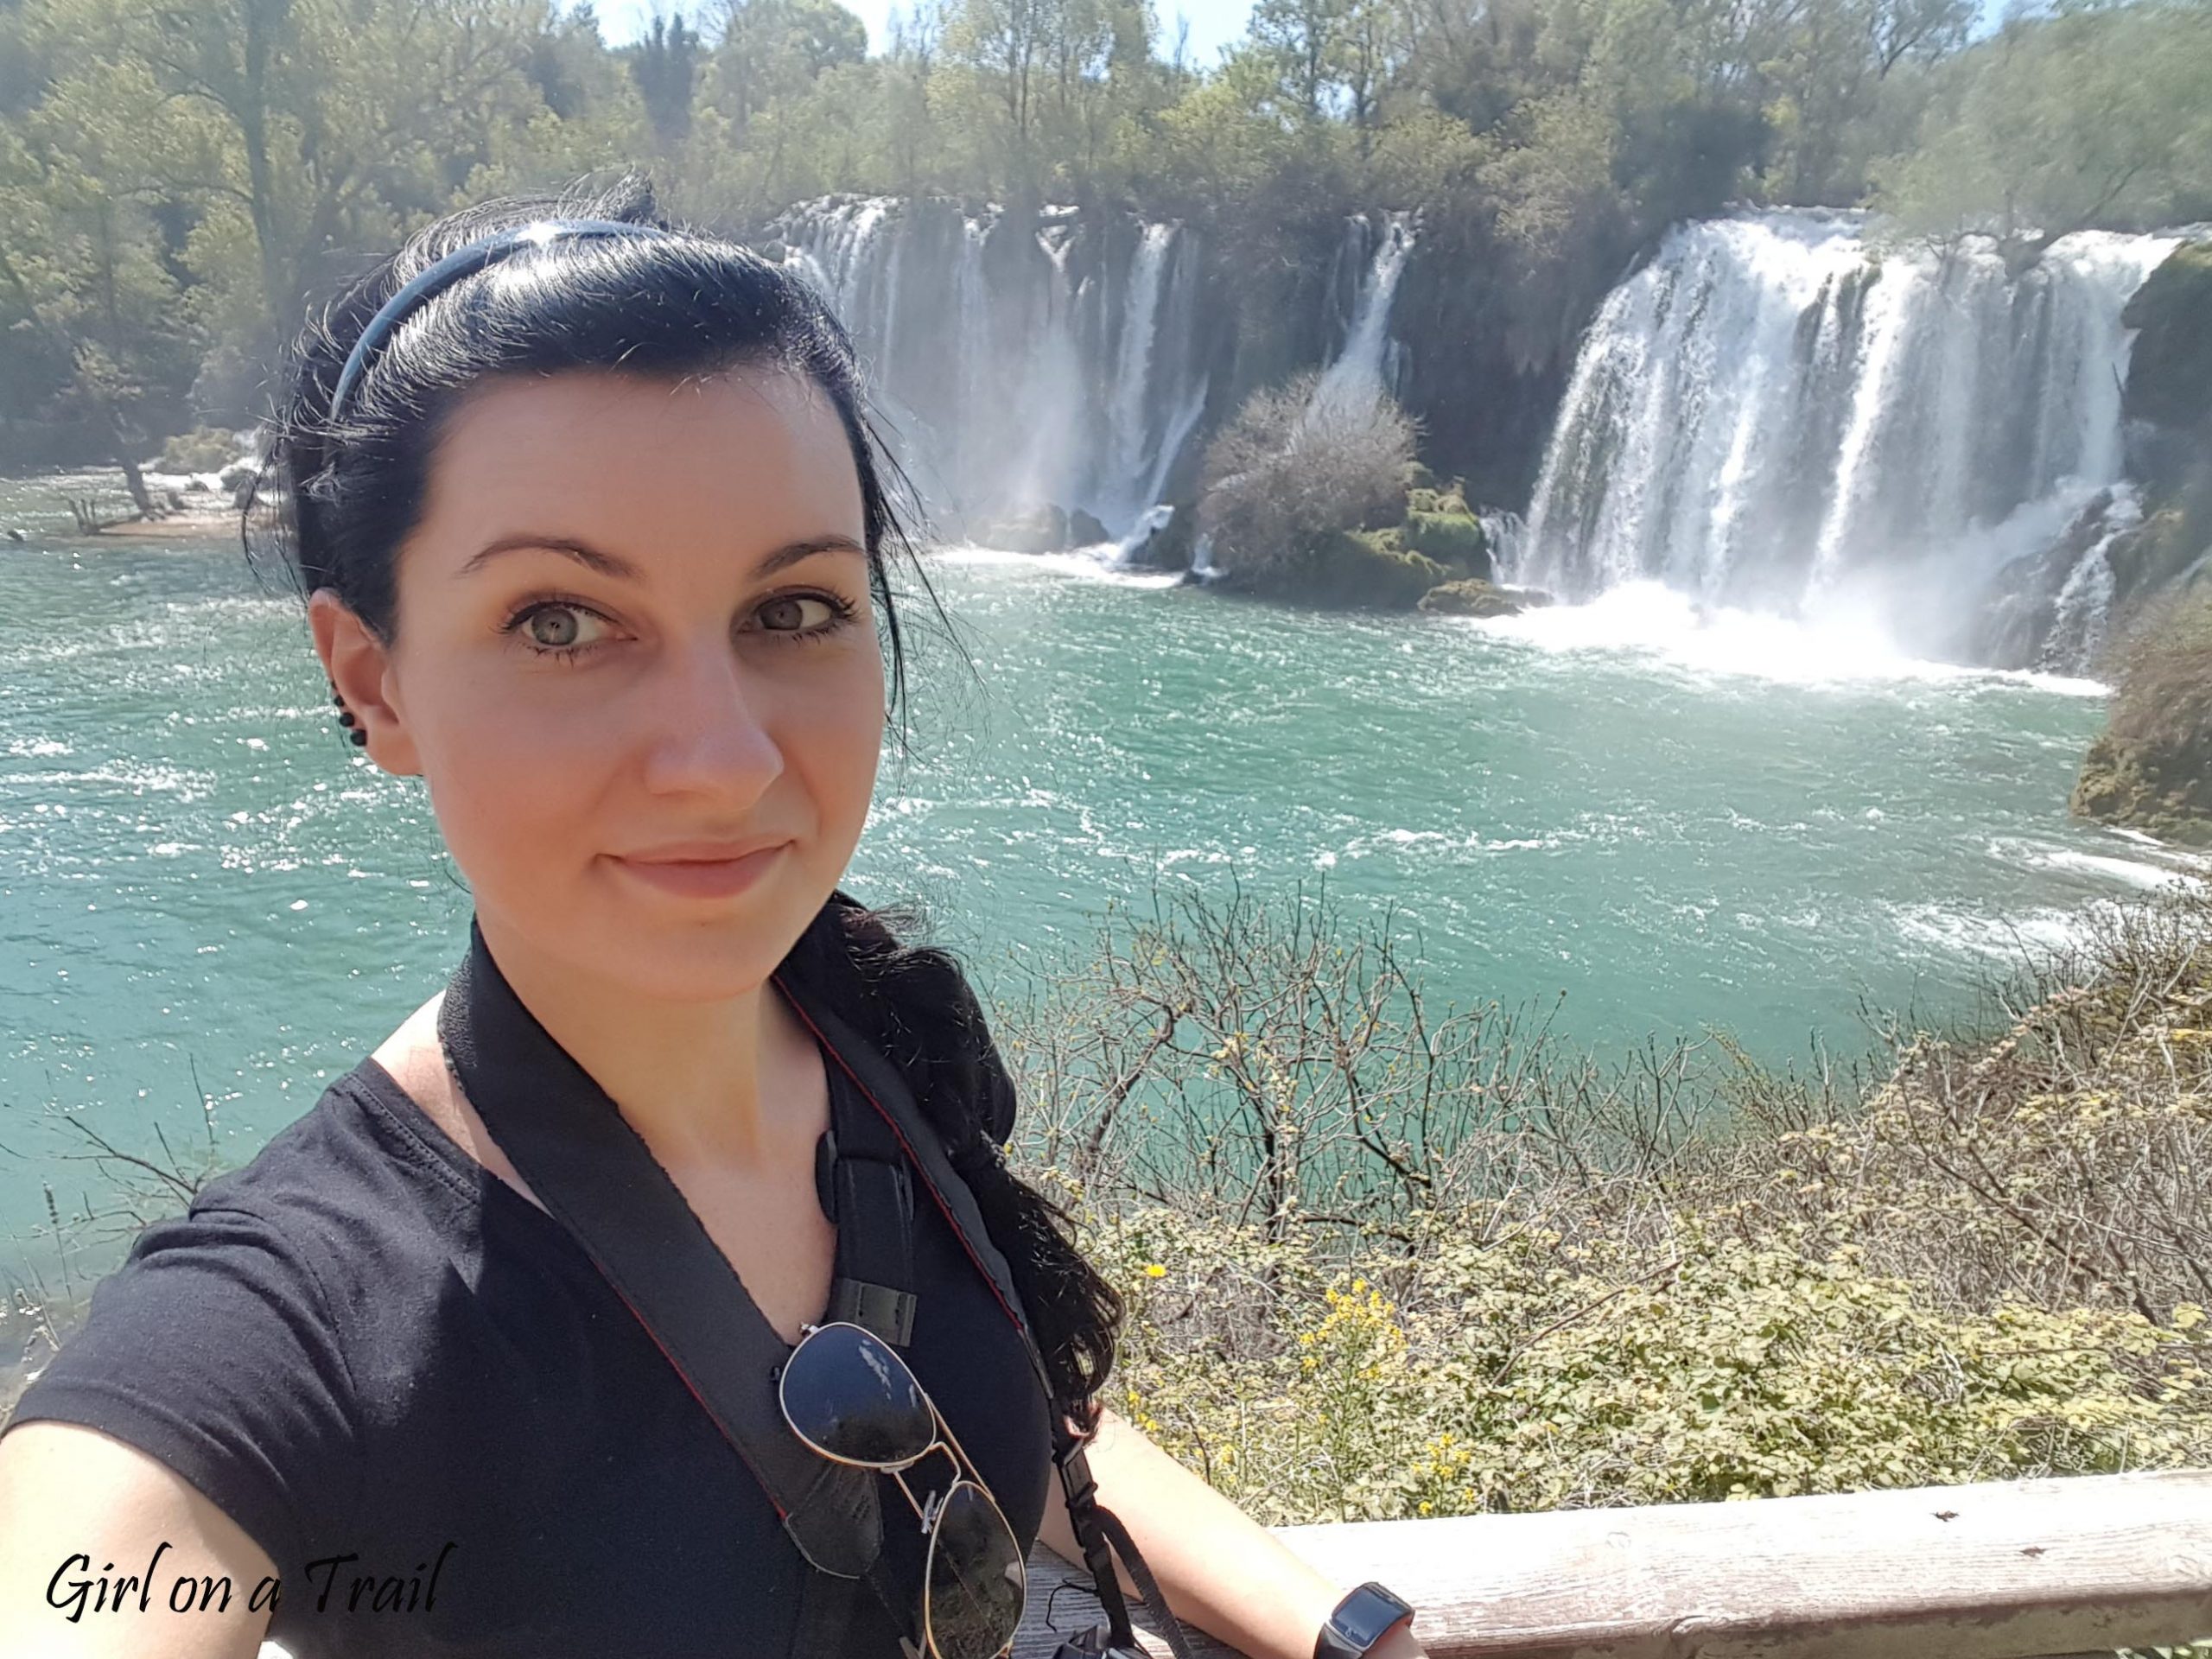 Mostar surroundings – an idea for a day trip